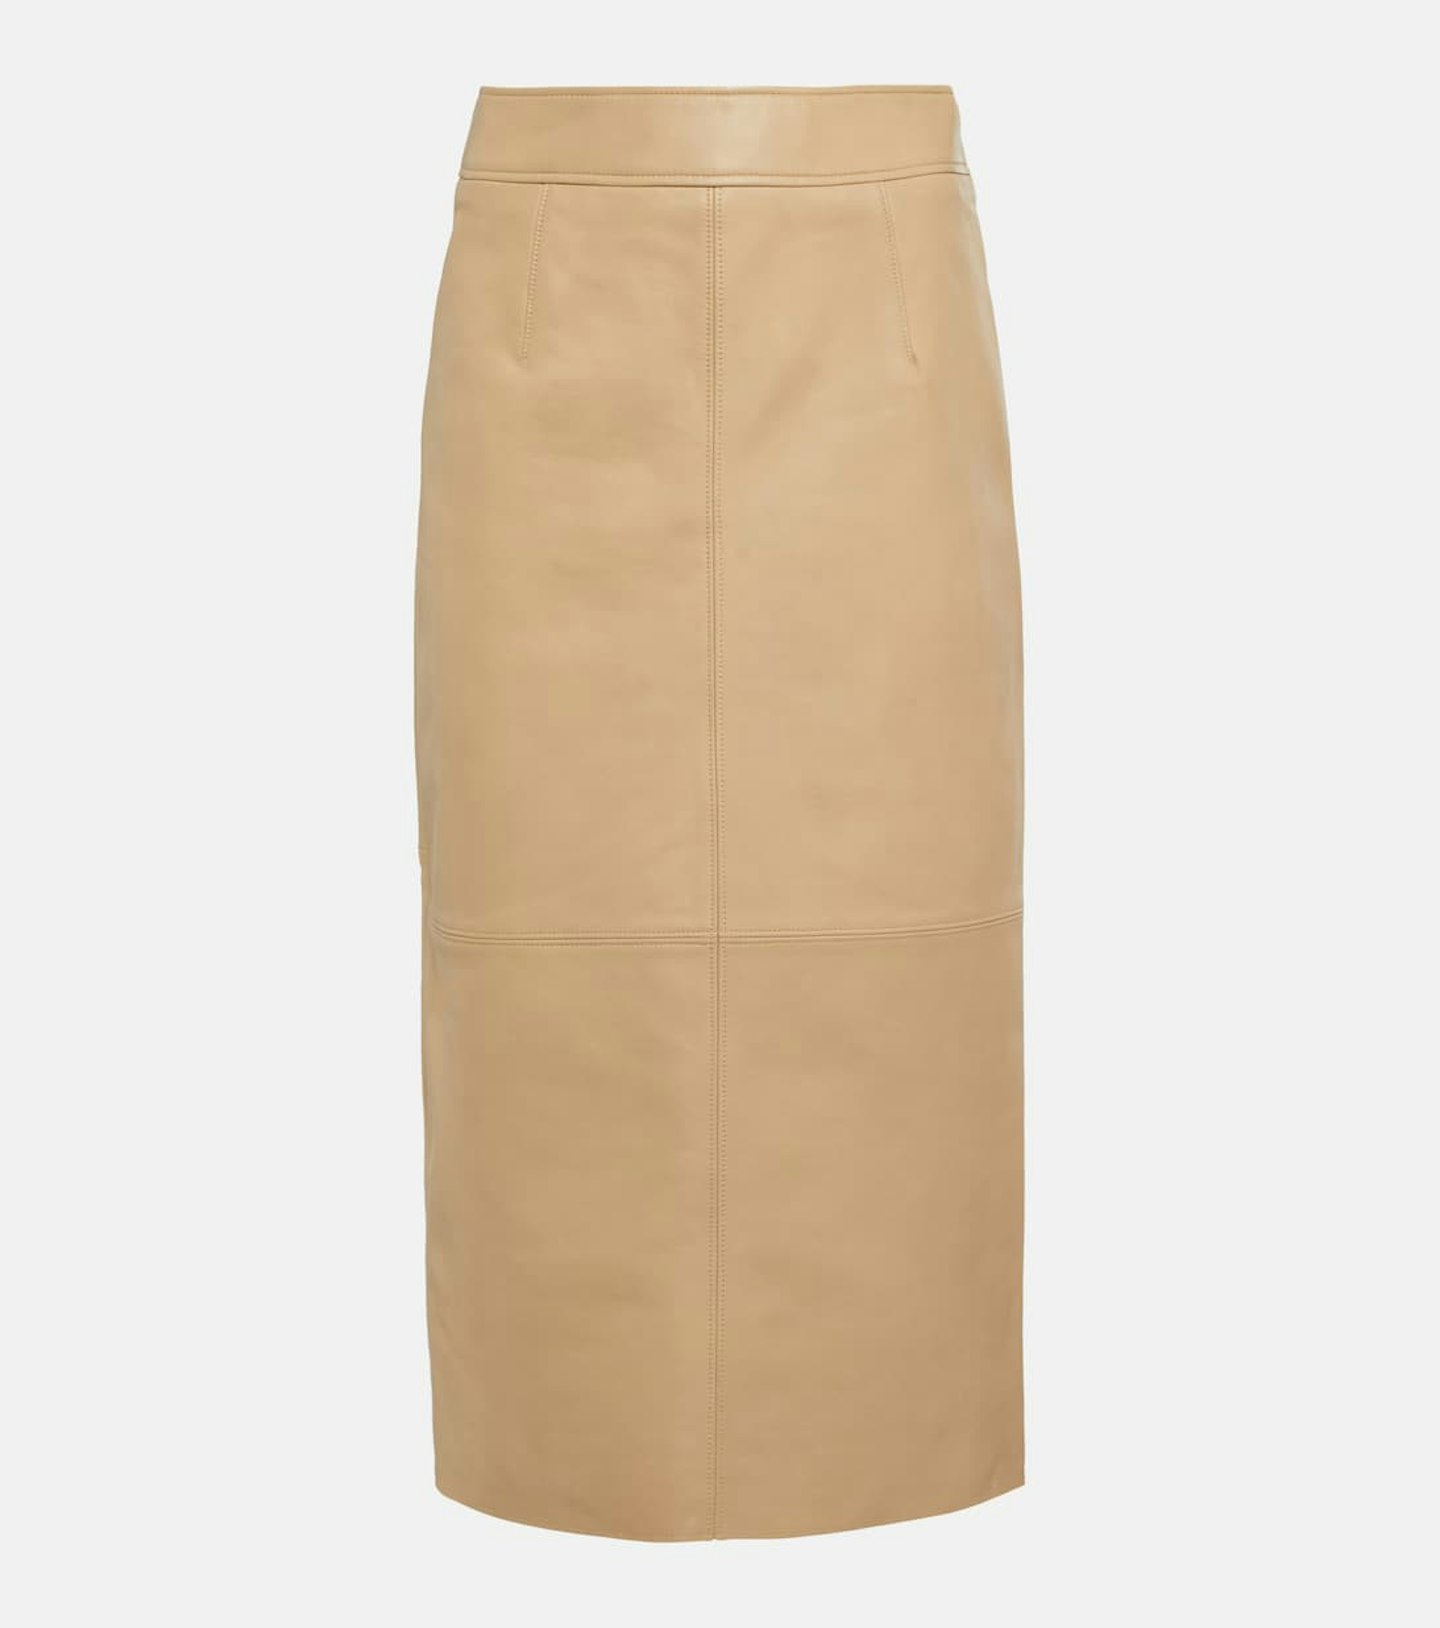 The Frankie Shop, Heather Leather Pencil Skirt